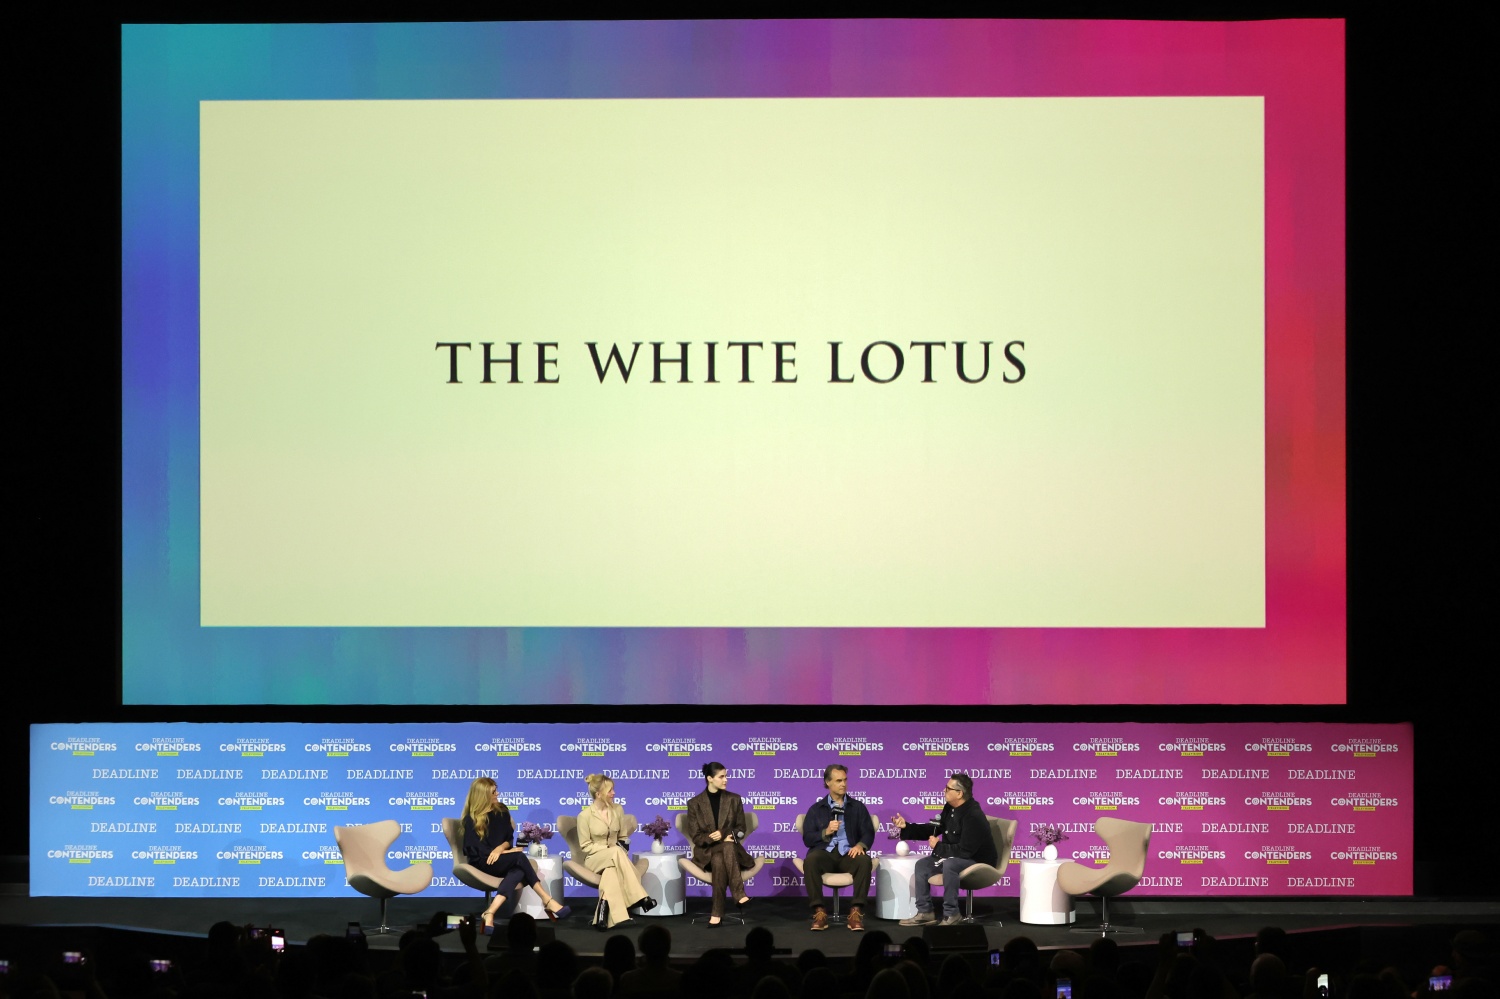 (L-R) Actors Connie Britton, Sydney Sweeney, Alexandra Daddario, Murray Bartlett, and moderator Anthony D'Alessandro at HBO Max's 'The White Lotus'